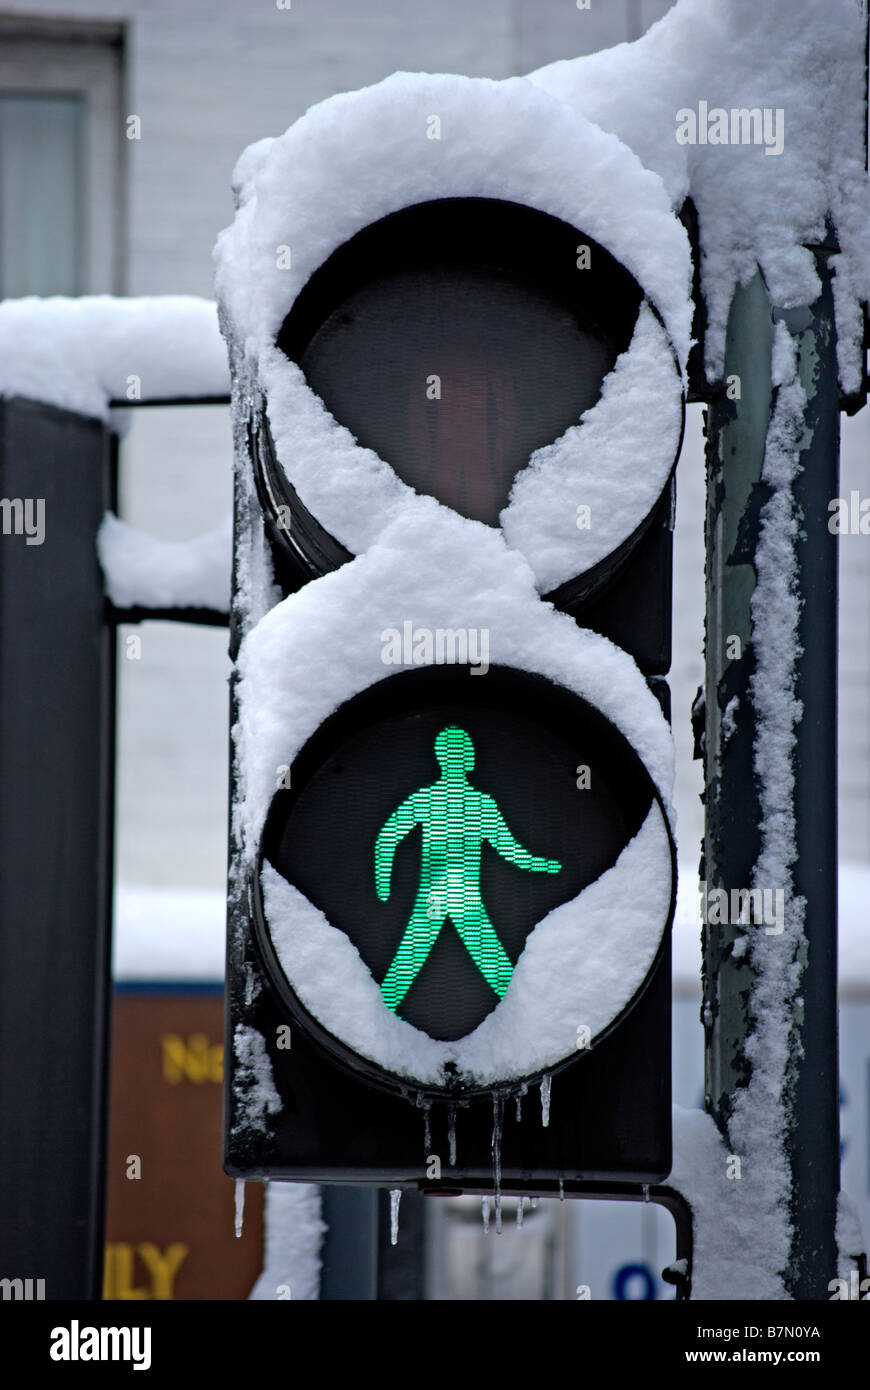 snow covered british traffic light showing green man, appearing to walk across snow, indicating pedestrians should cross Stock Photo